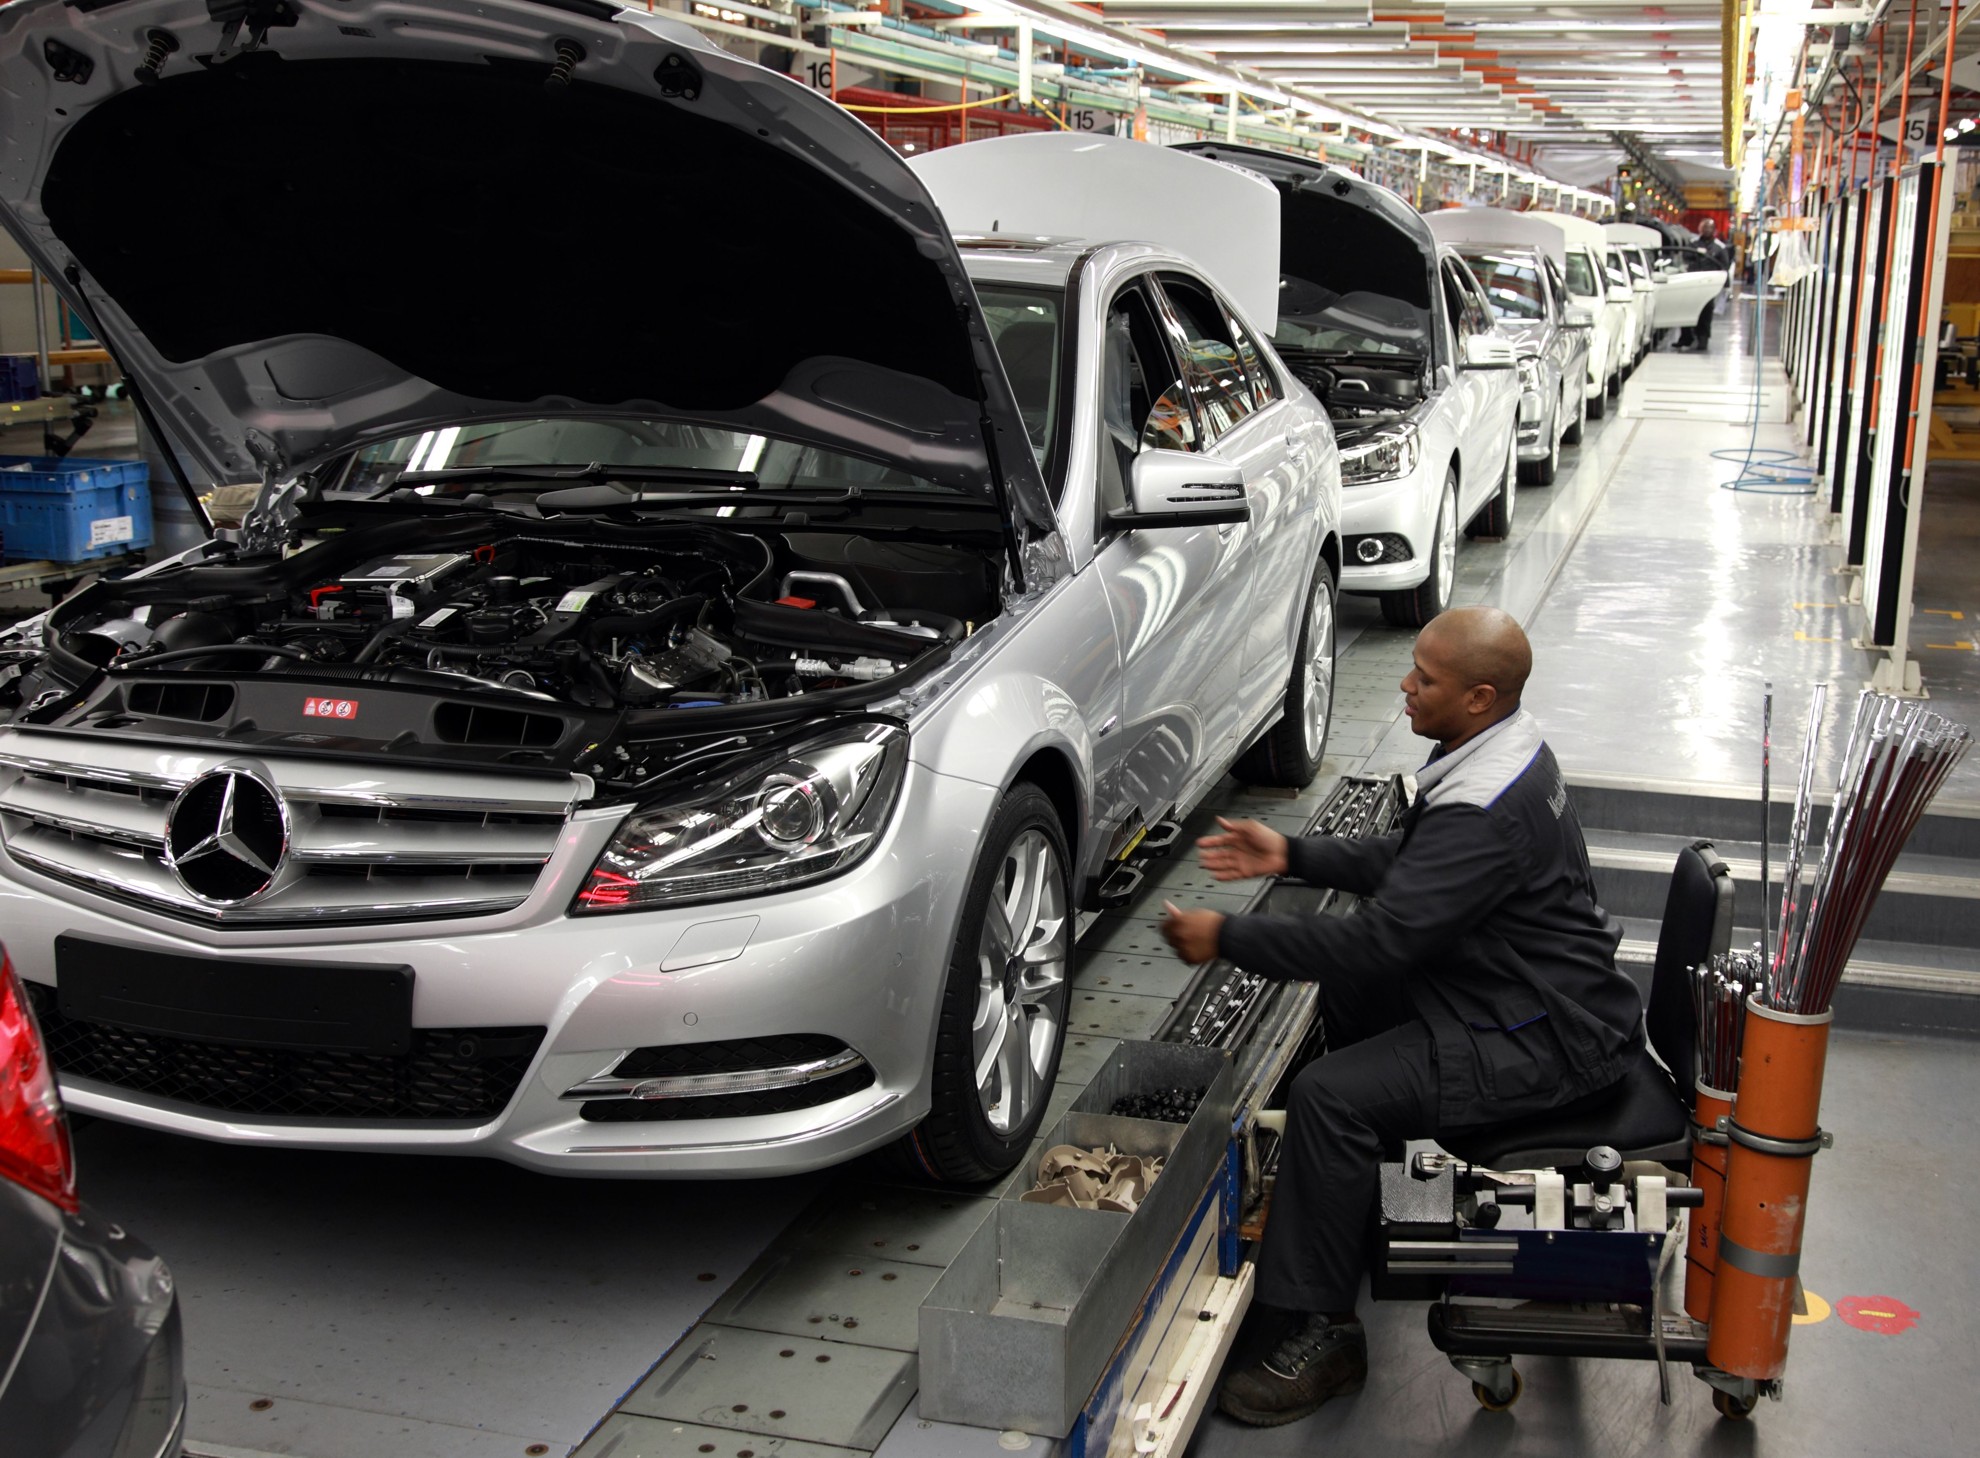 Mercedes-Benz South Africa production plant takes Silver in Europe-Africa